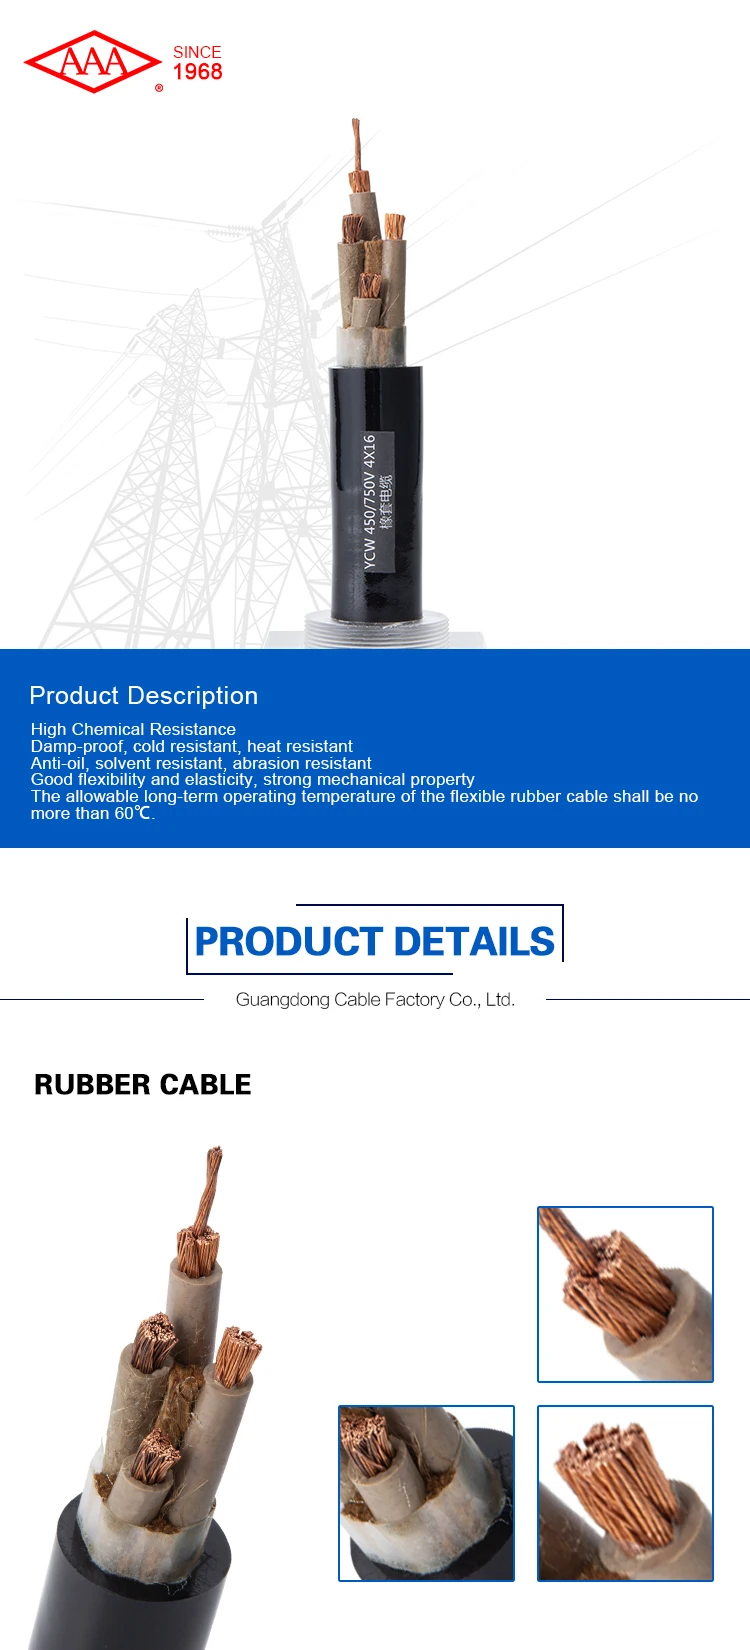 AAA rubber cables directly factory price for TV-5